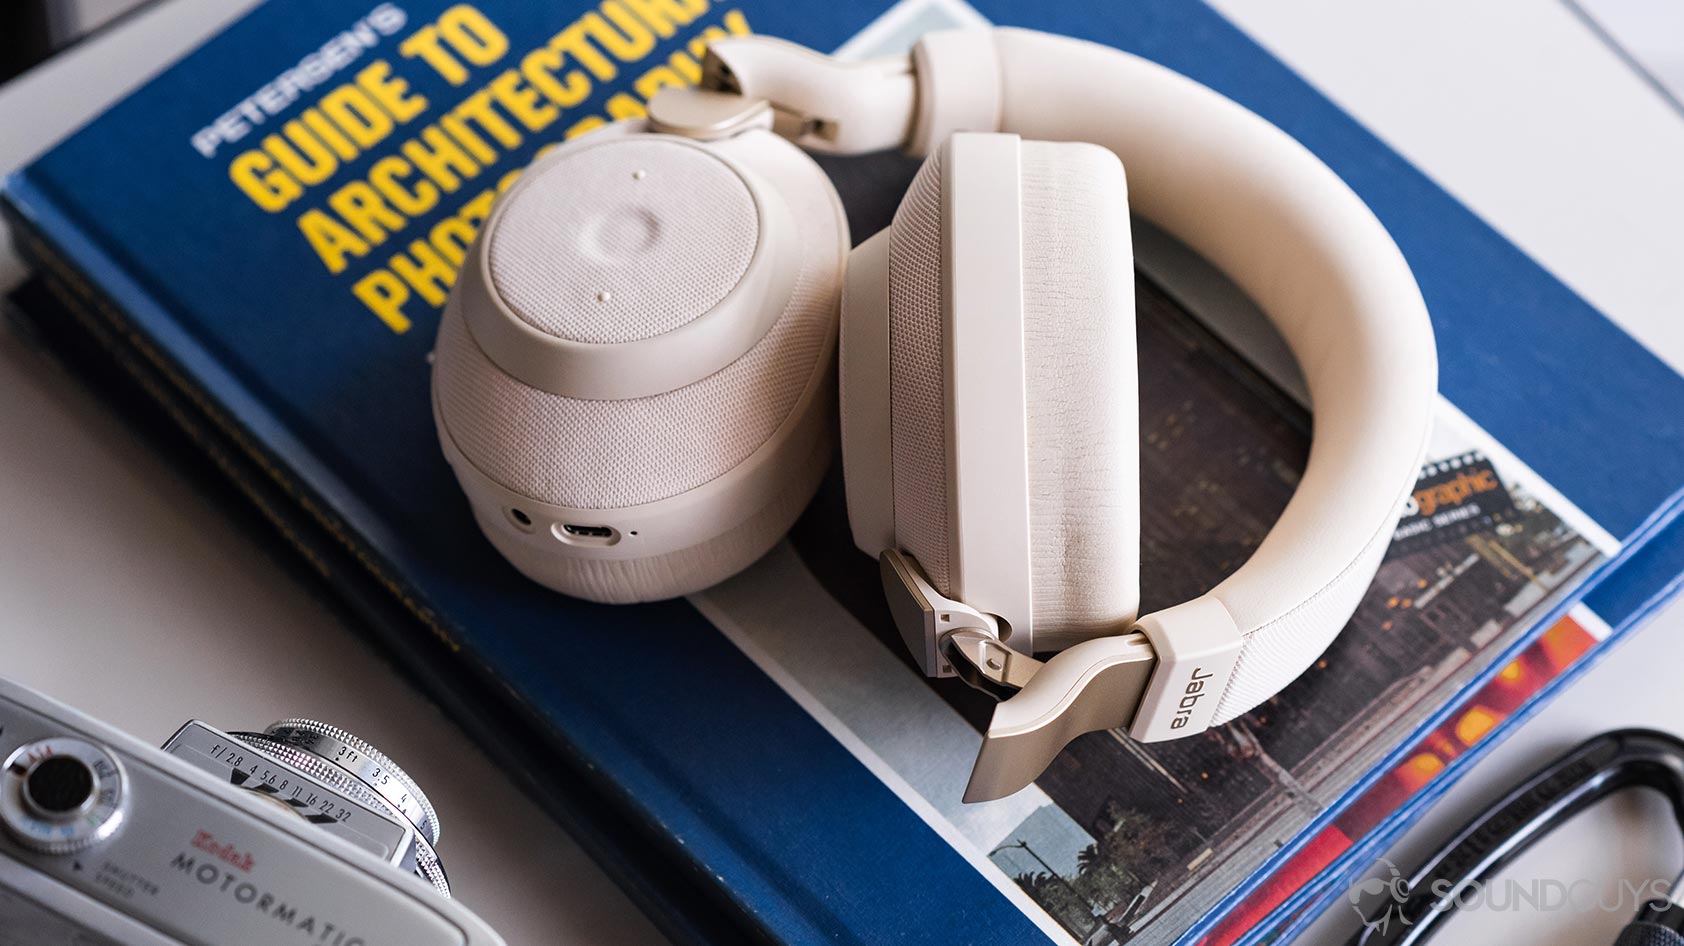 A photo of the Jabra Elite 85h headphones partly folded on a stack of blue, thin books with a vintage camera in the bottom left corner.